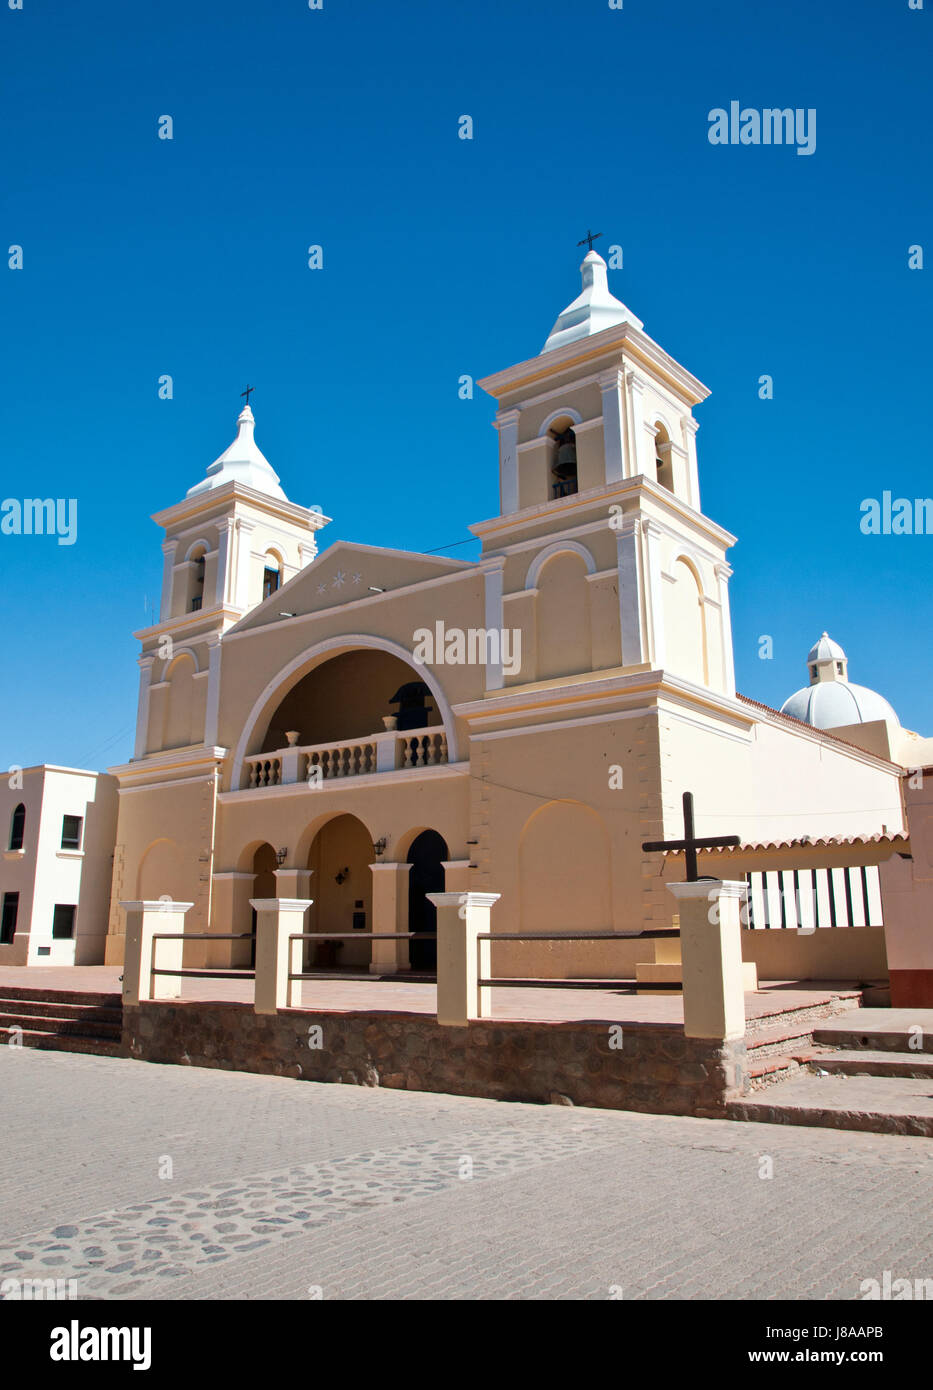 church from the colonial era in northern argentina Stock Photo